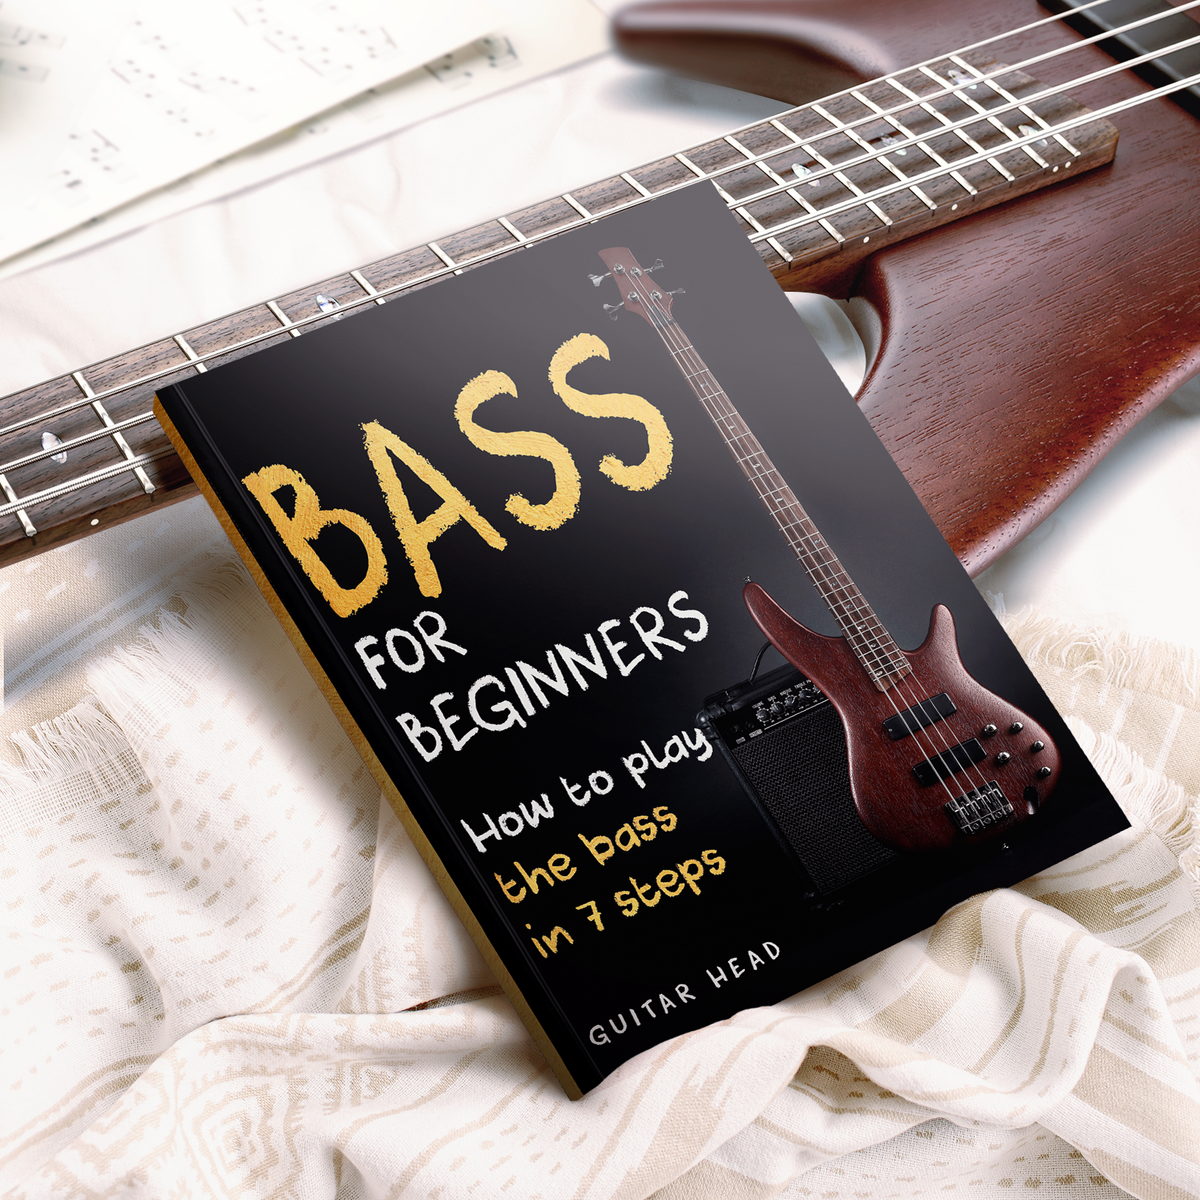 Bass for Beginners: How to Play the Bass in 7 Simple Steps – Guitar Head